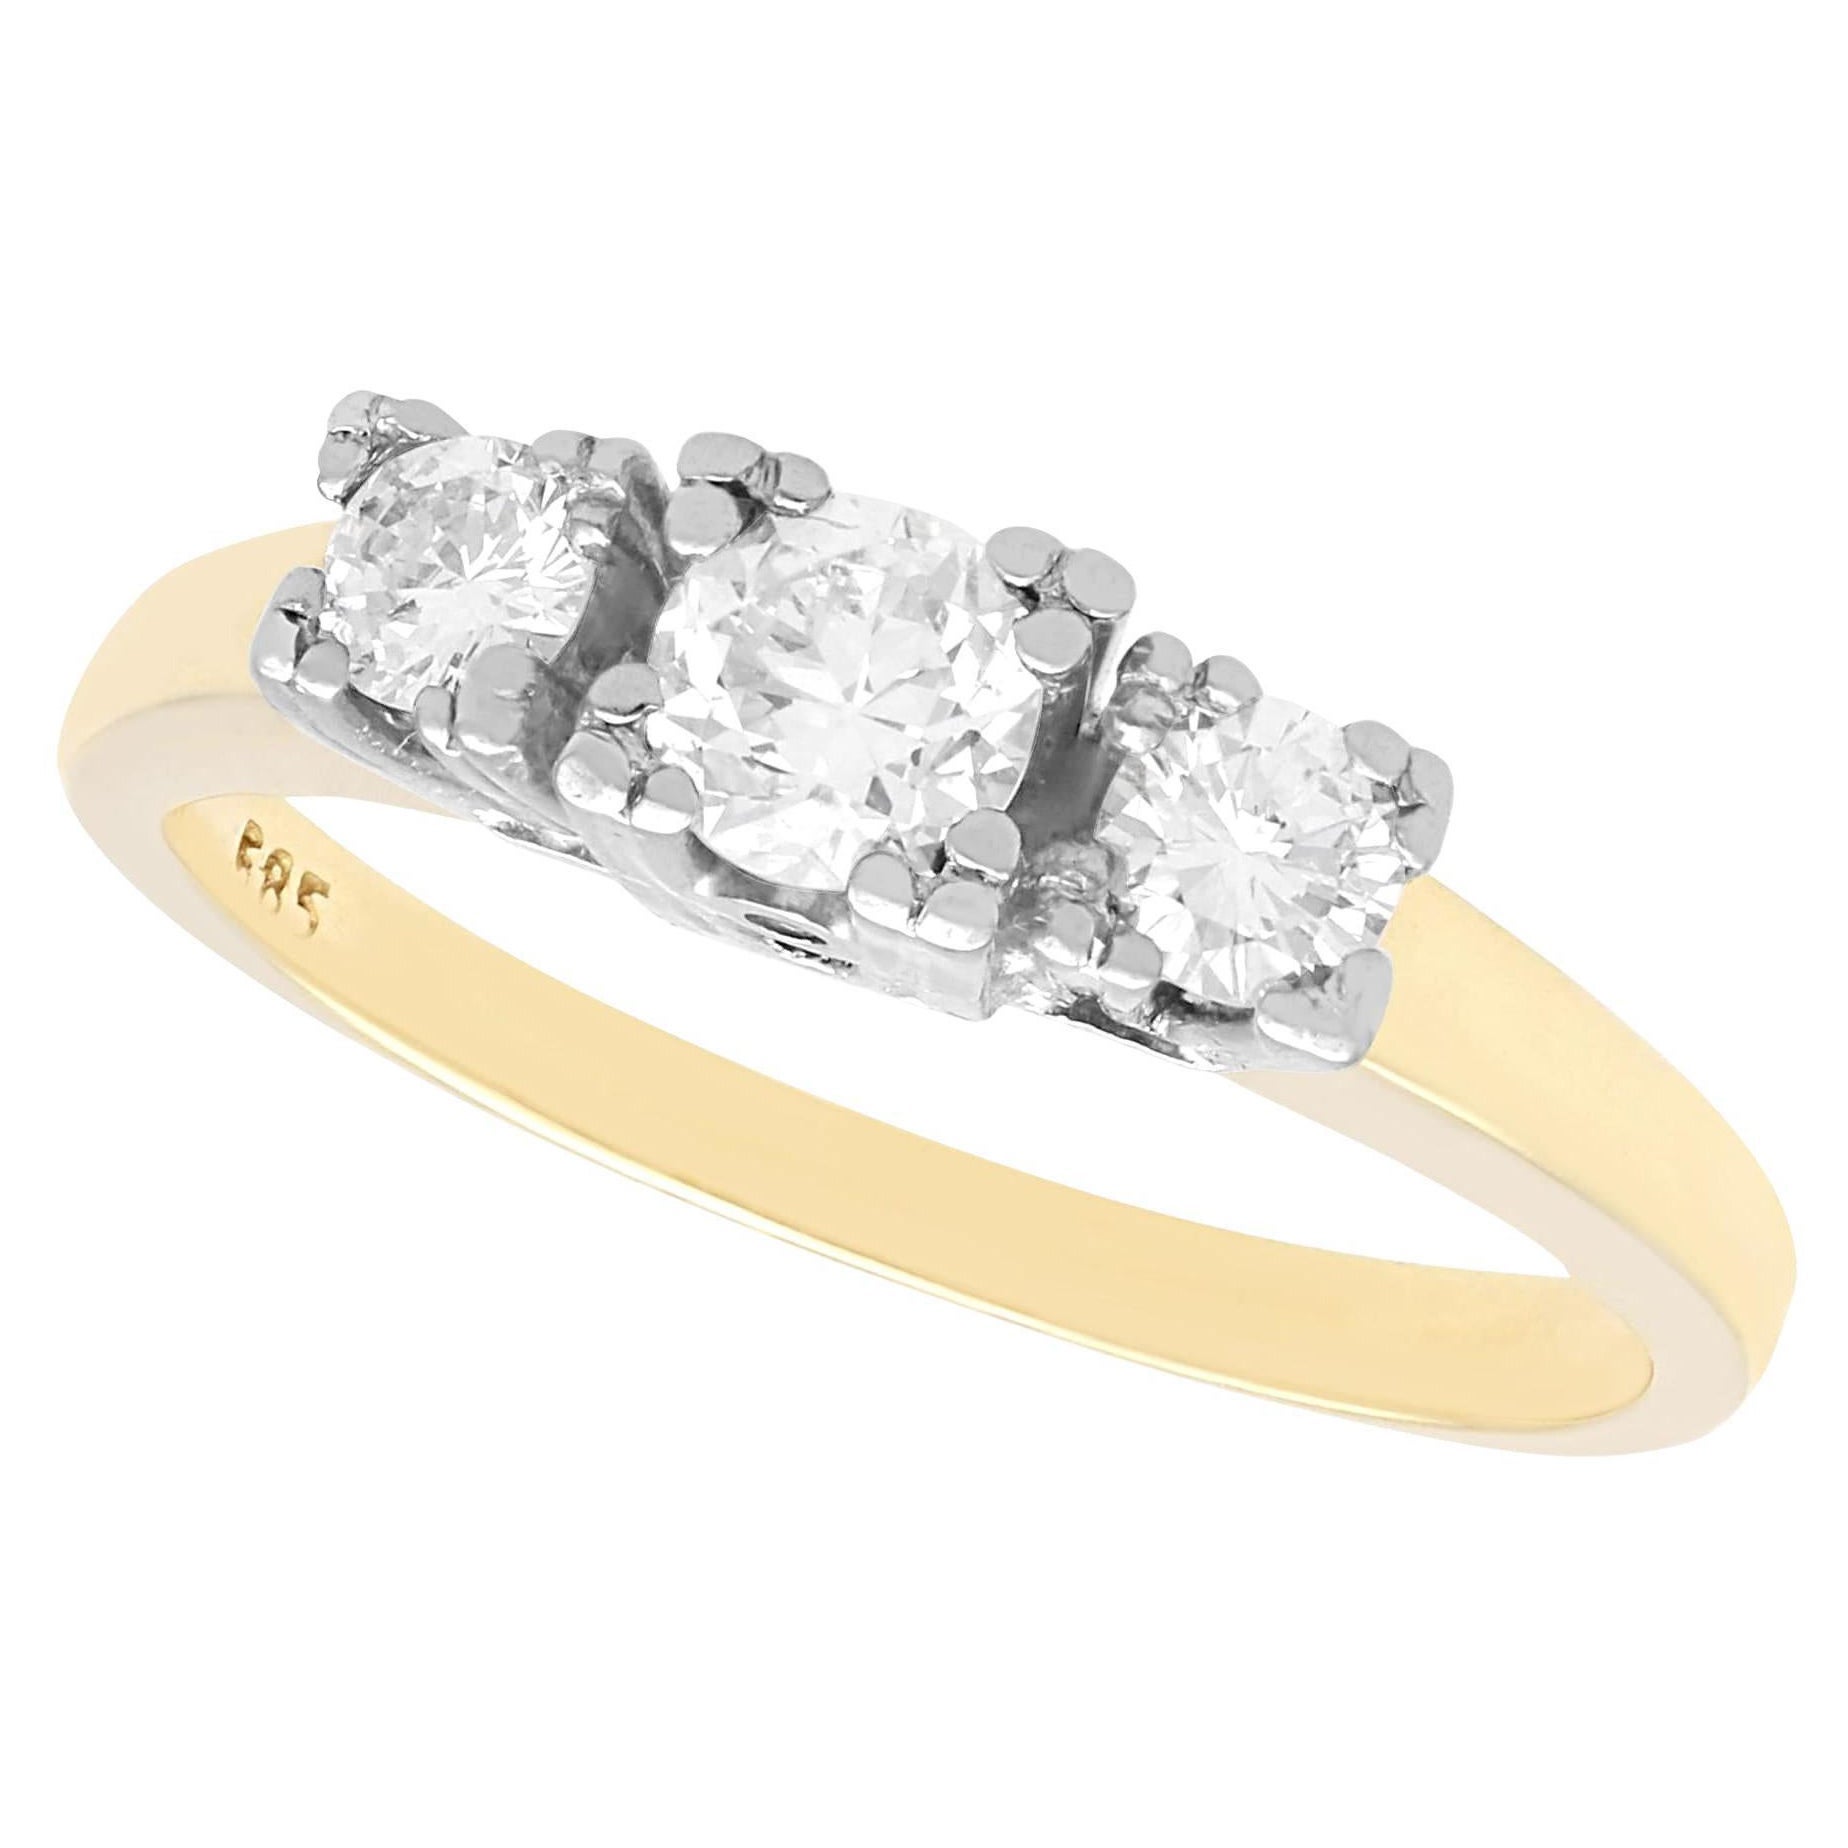 1950s Vintage 0.64 Carat Diamond and 14k Yellow Gold Trilogy Ring For Sale